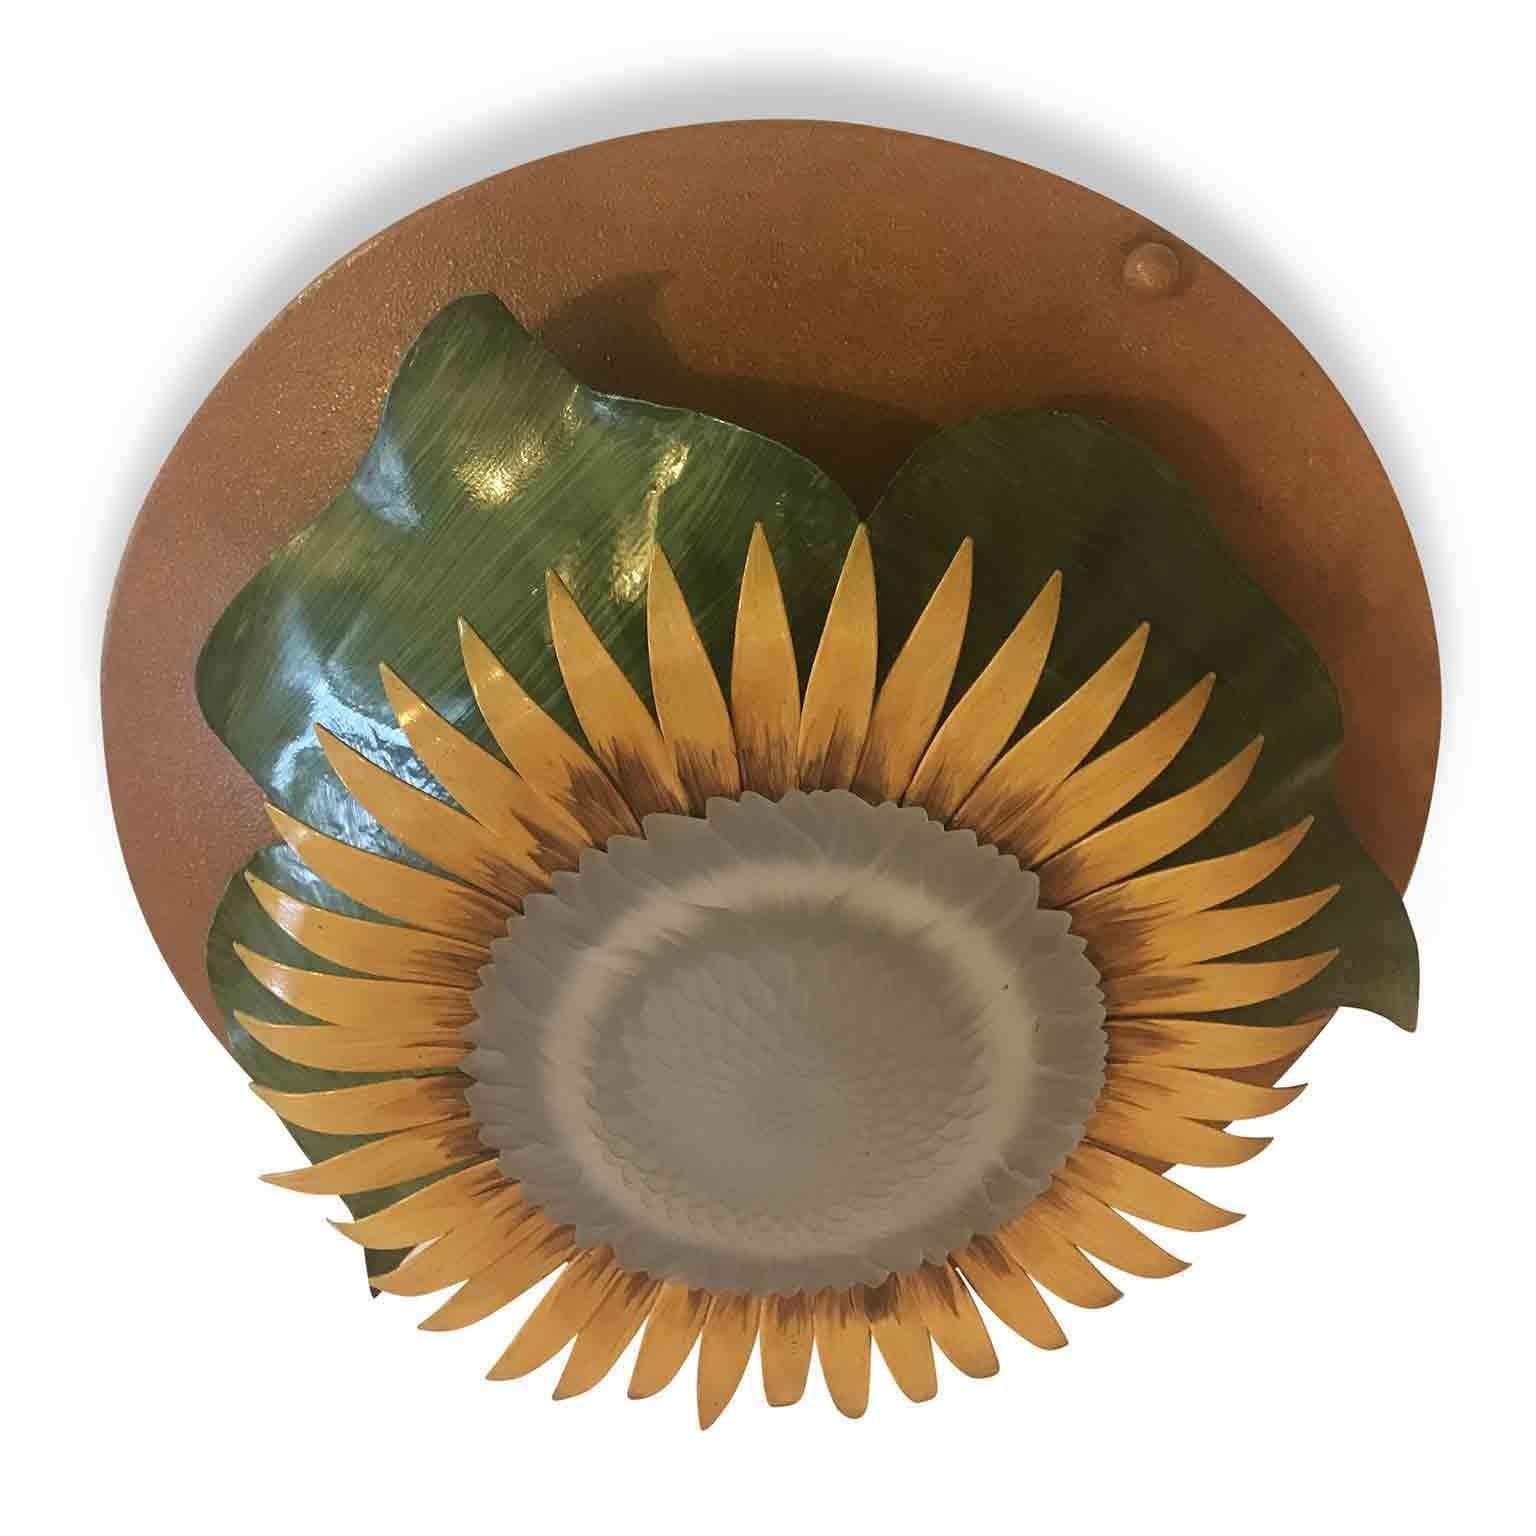 Vintage Italian one-light ceiling fixture by Banci, manufactured by Banci Firenze. One-light socket depicting a large sunflower. This original Italian design ceiling light is inspired to a metal terracotta vase pot decorated with green painted